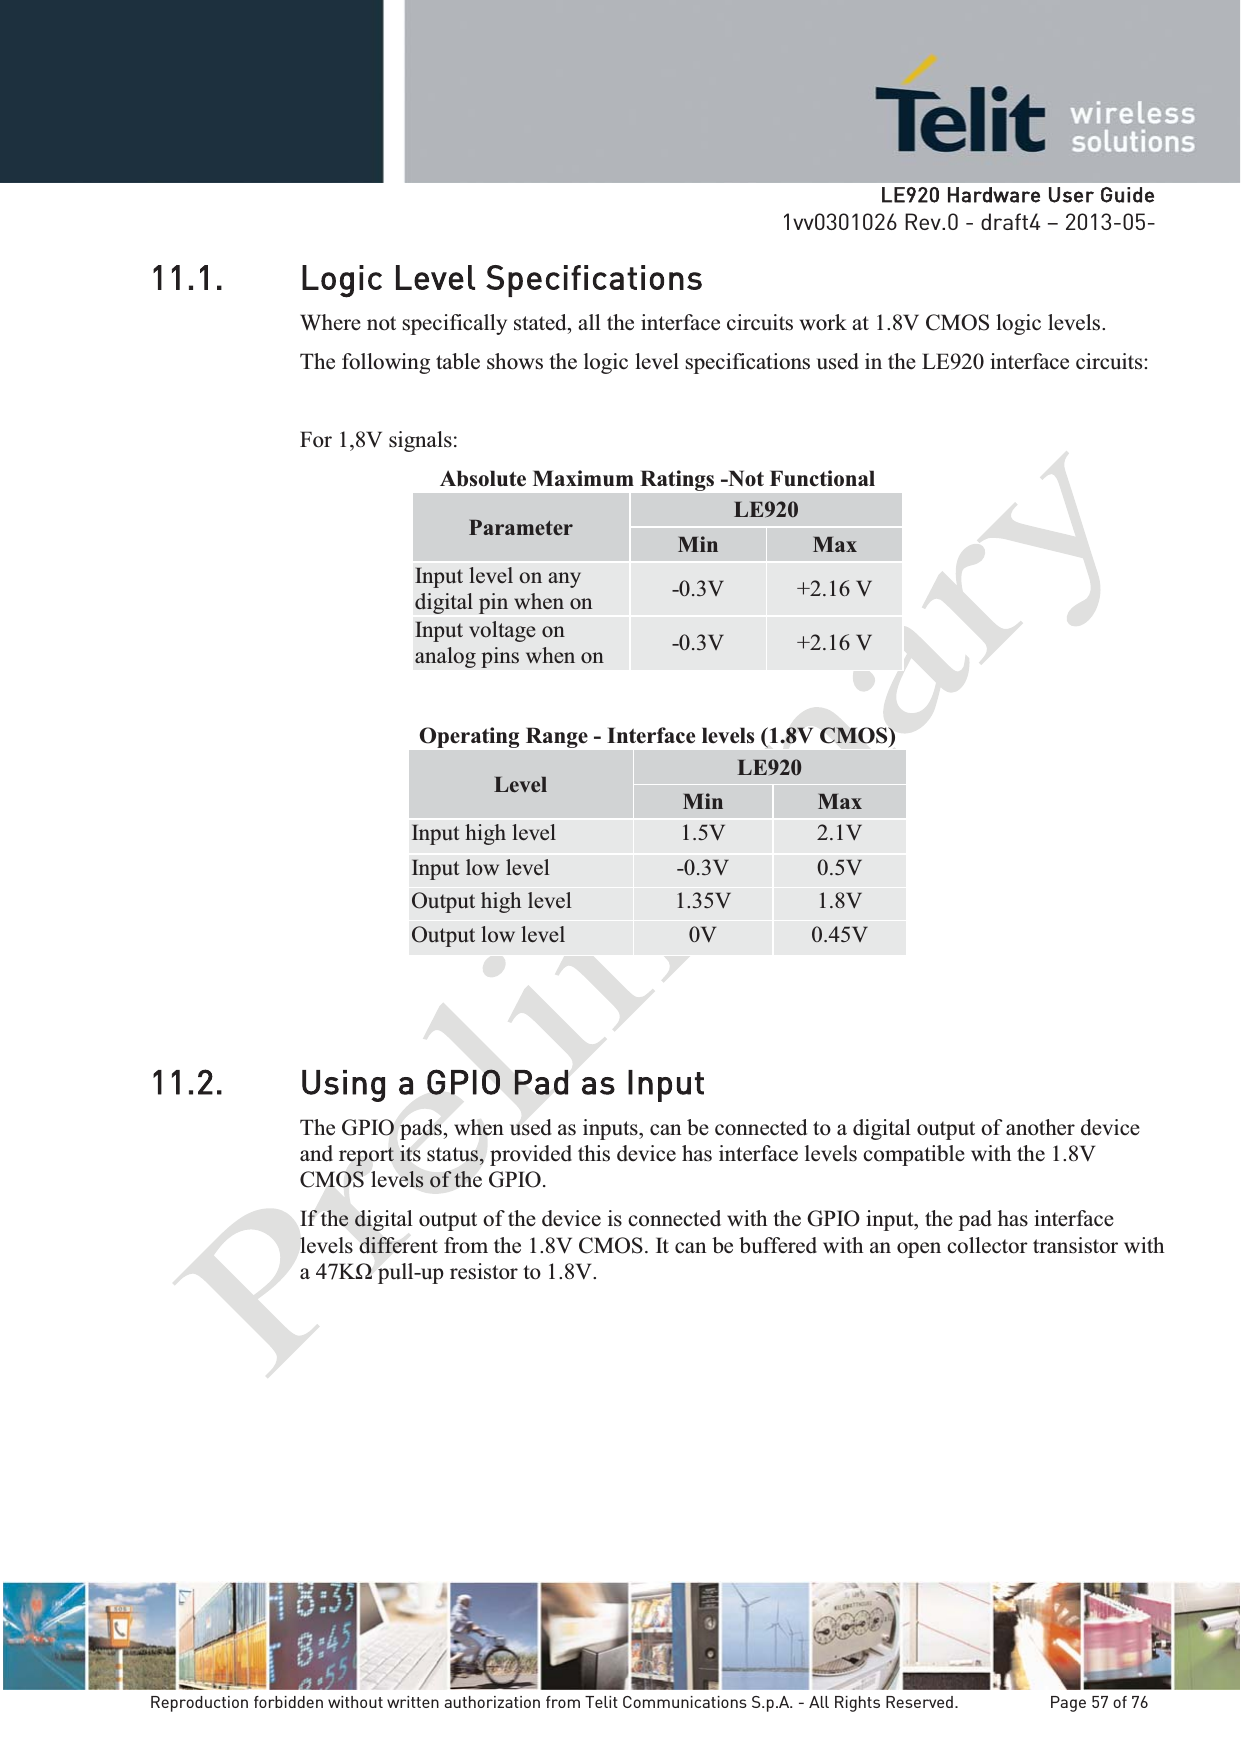   LLE920 Hardware User Guide1vv0301026 Rev.0 - draft4 – 2013-05-Reproduction forbidden without written authorization from Telit Communications S.p.A. - All Rights Reserved.    Page 57 of 76 11.1. Logic Level Specifications Where not specifically stated, all the interface circuits work at 1.8V CMOS logic levels. The following table shows the logic level specifications used in the LE920 interface circuits:  For 1,8V signals: Absolute Maximum Ratings -Not Functional Parameter  LE920 Min  Max Input level on any digital pin when on  -0.3V  +2.16 V Input voltage on analog pins when on  -0.3V  +2.16 V Operating Range - Interface levels (1.8V CMOS) Level  LE920 Min  MaxInput high level  1.5V  2.1V Input low level  -0.3V  0.5V Output high level  1.35V  1.8V Output low level  0V  0.45V 11.2. Using a GPIO Pad as InputThe GPIO pads, when used as inputs, can be connected to a digital output of another device and report its status, provided this device has interface levels compatible with the 1.8V CMOS levels of the GPIO.  If the digital output of the device is connected with the GPIO input, the pad has interface levels different from the 1.8V CMOS. It can be buffered with an open collector transistor with -up resistor to 1.8V.   